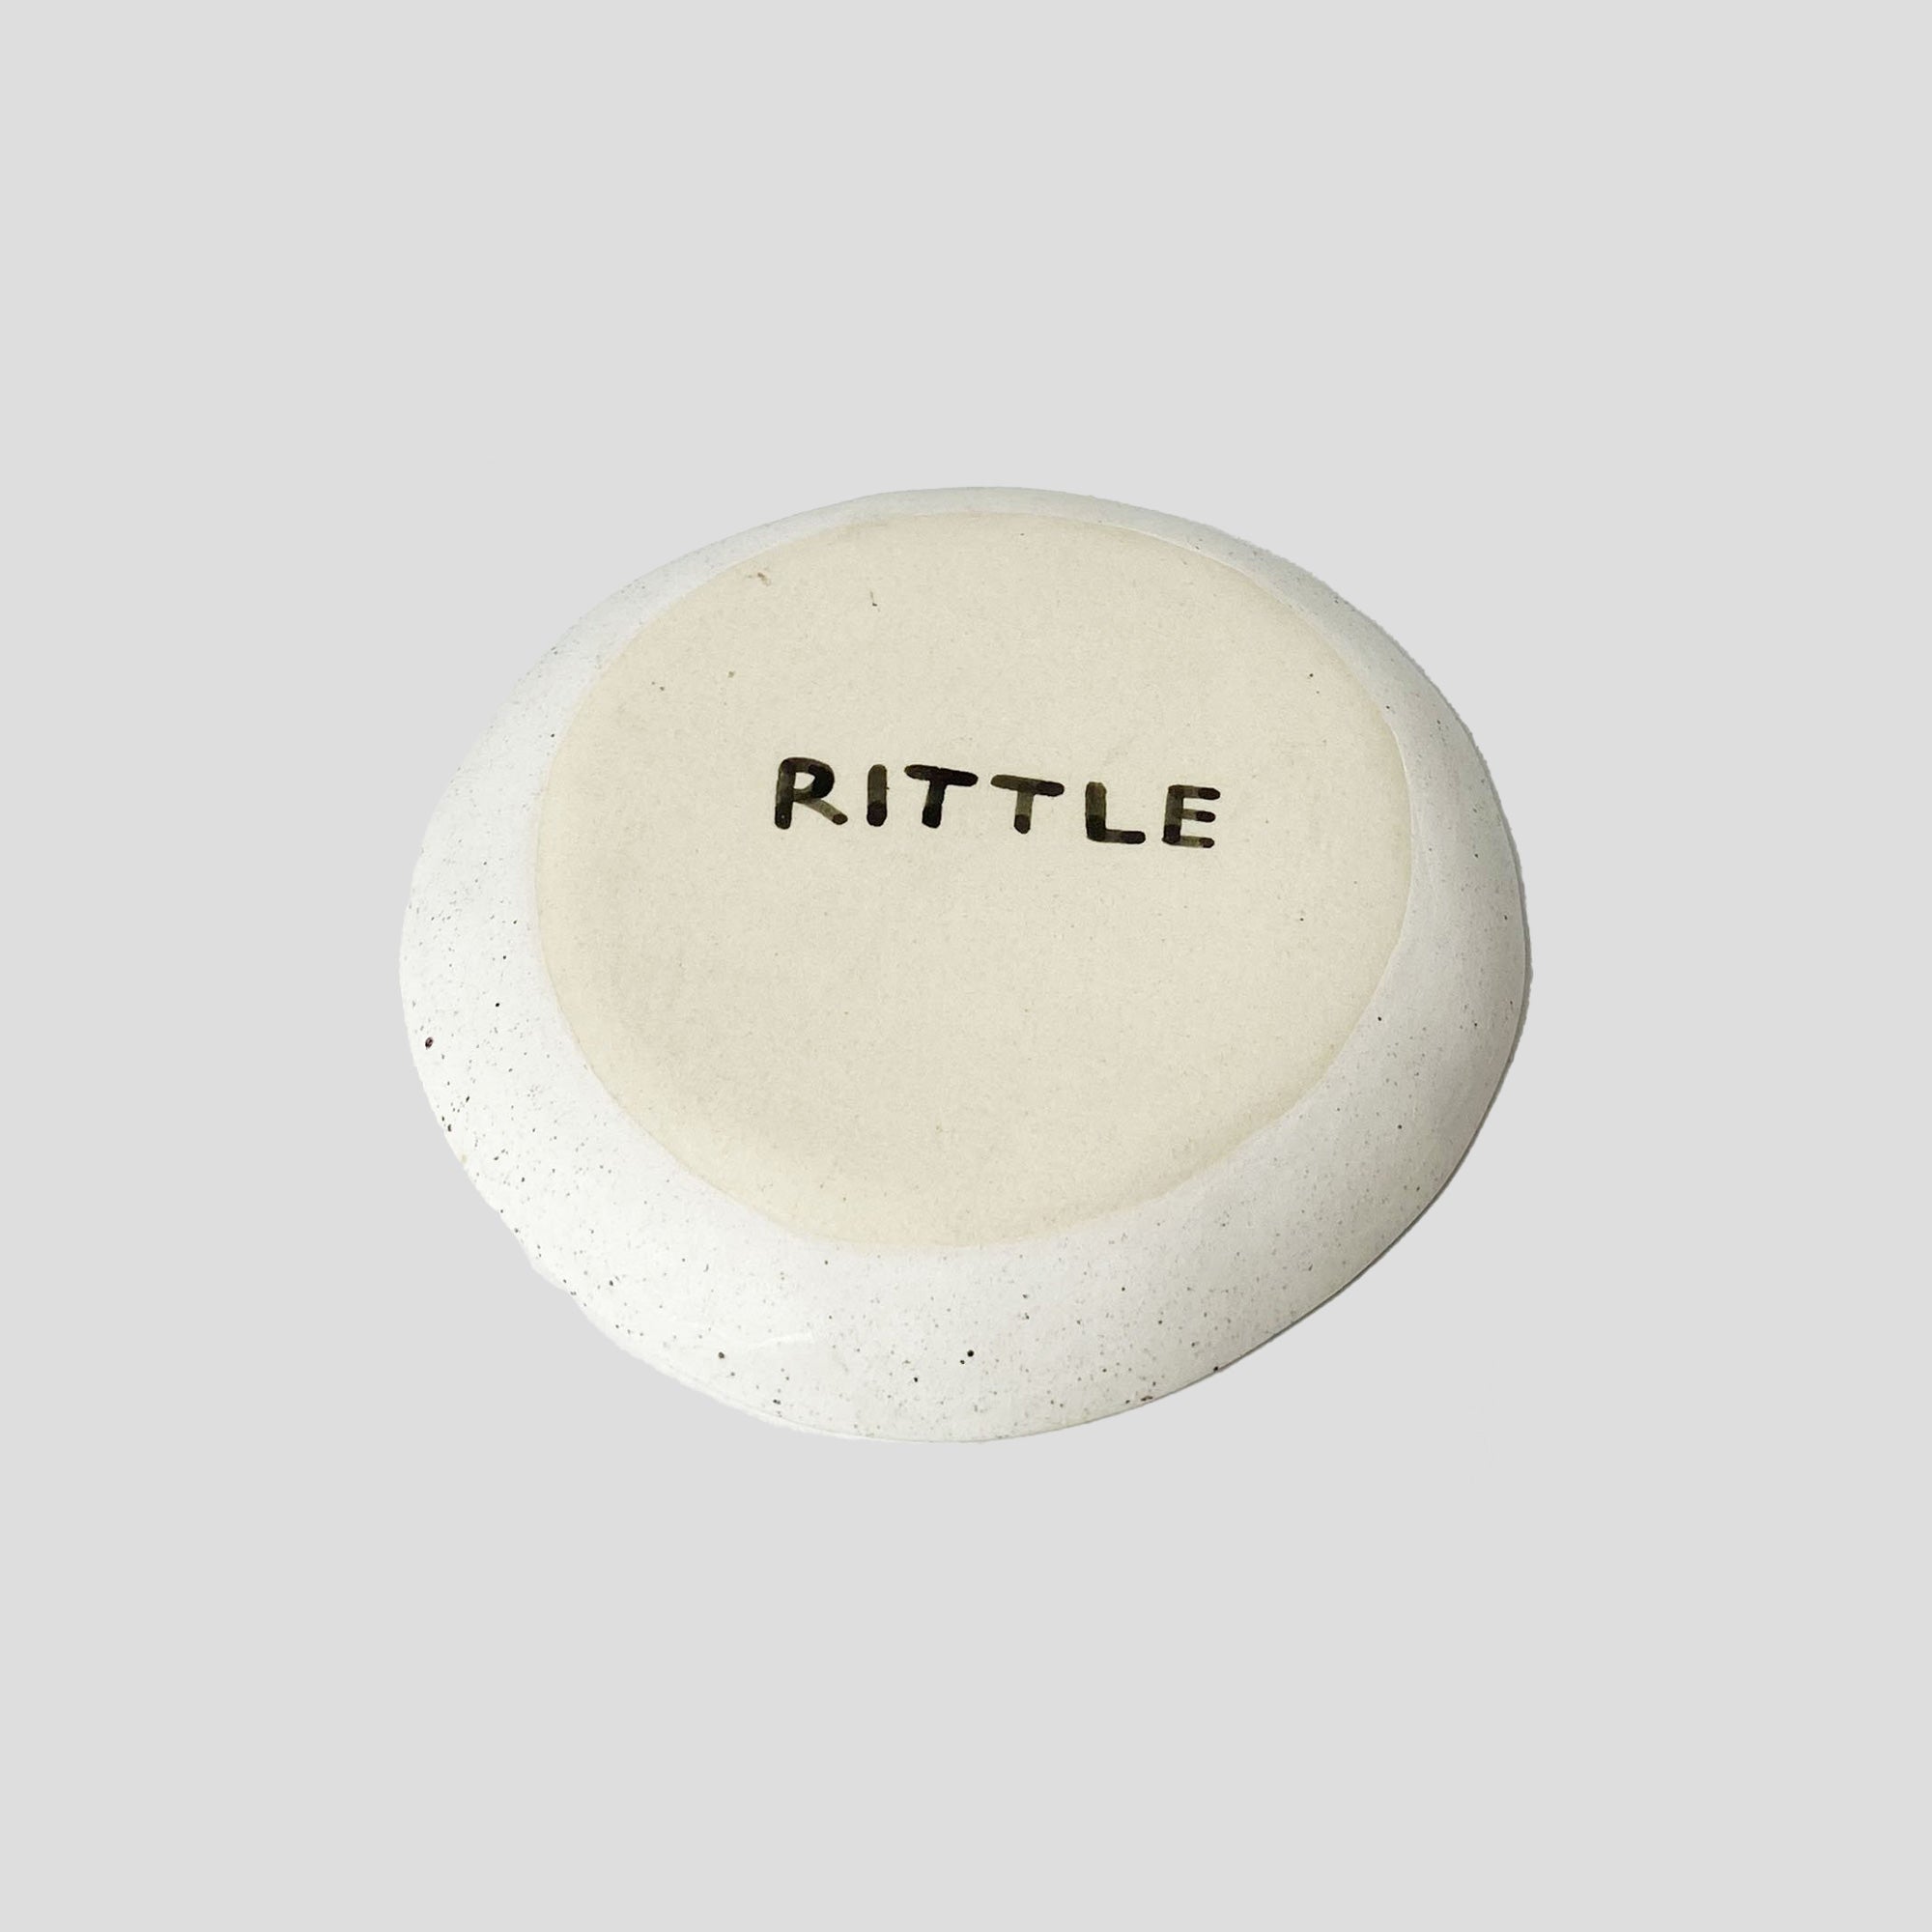 Rittle Ring Dish - Black Speckle